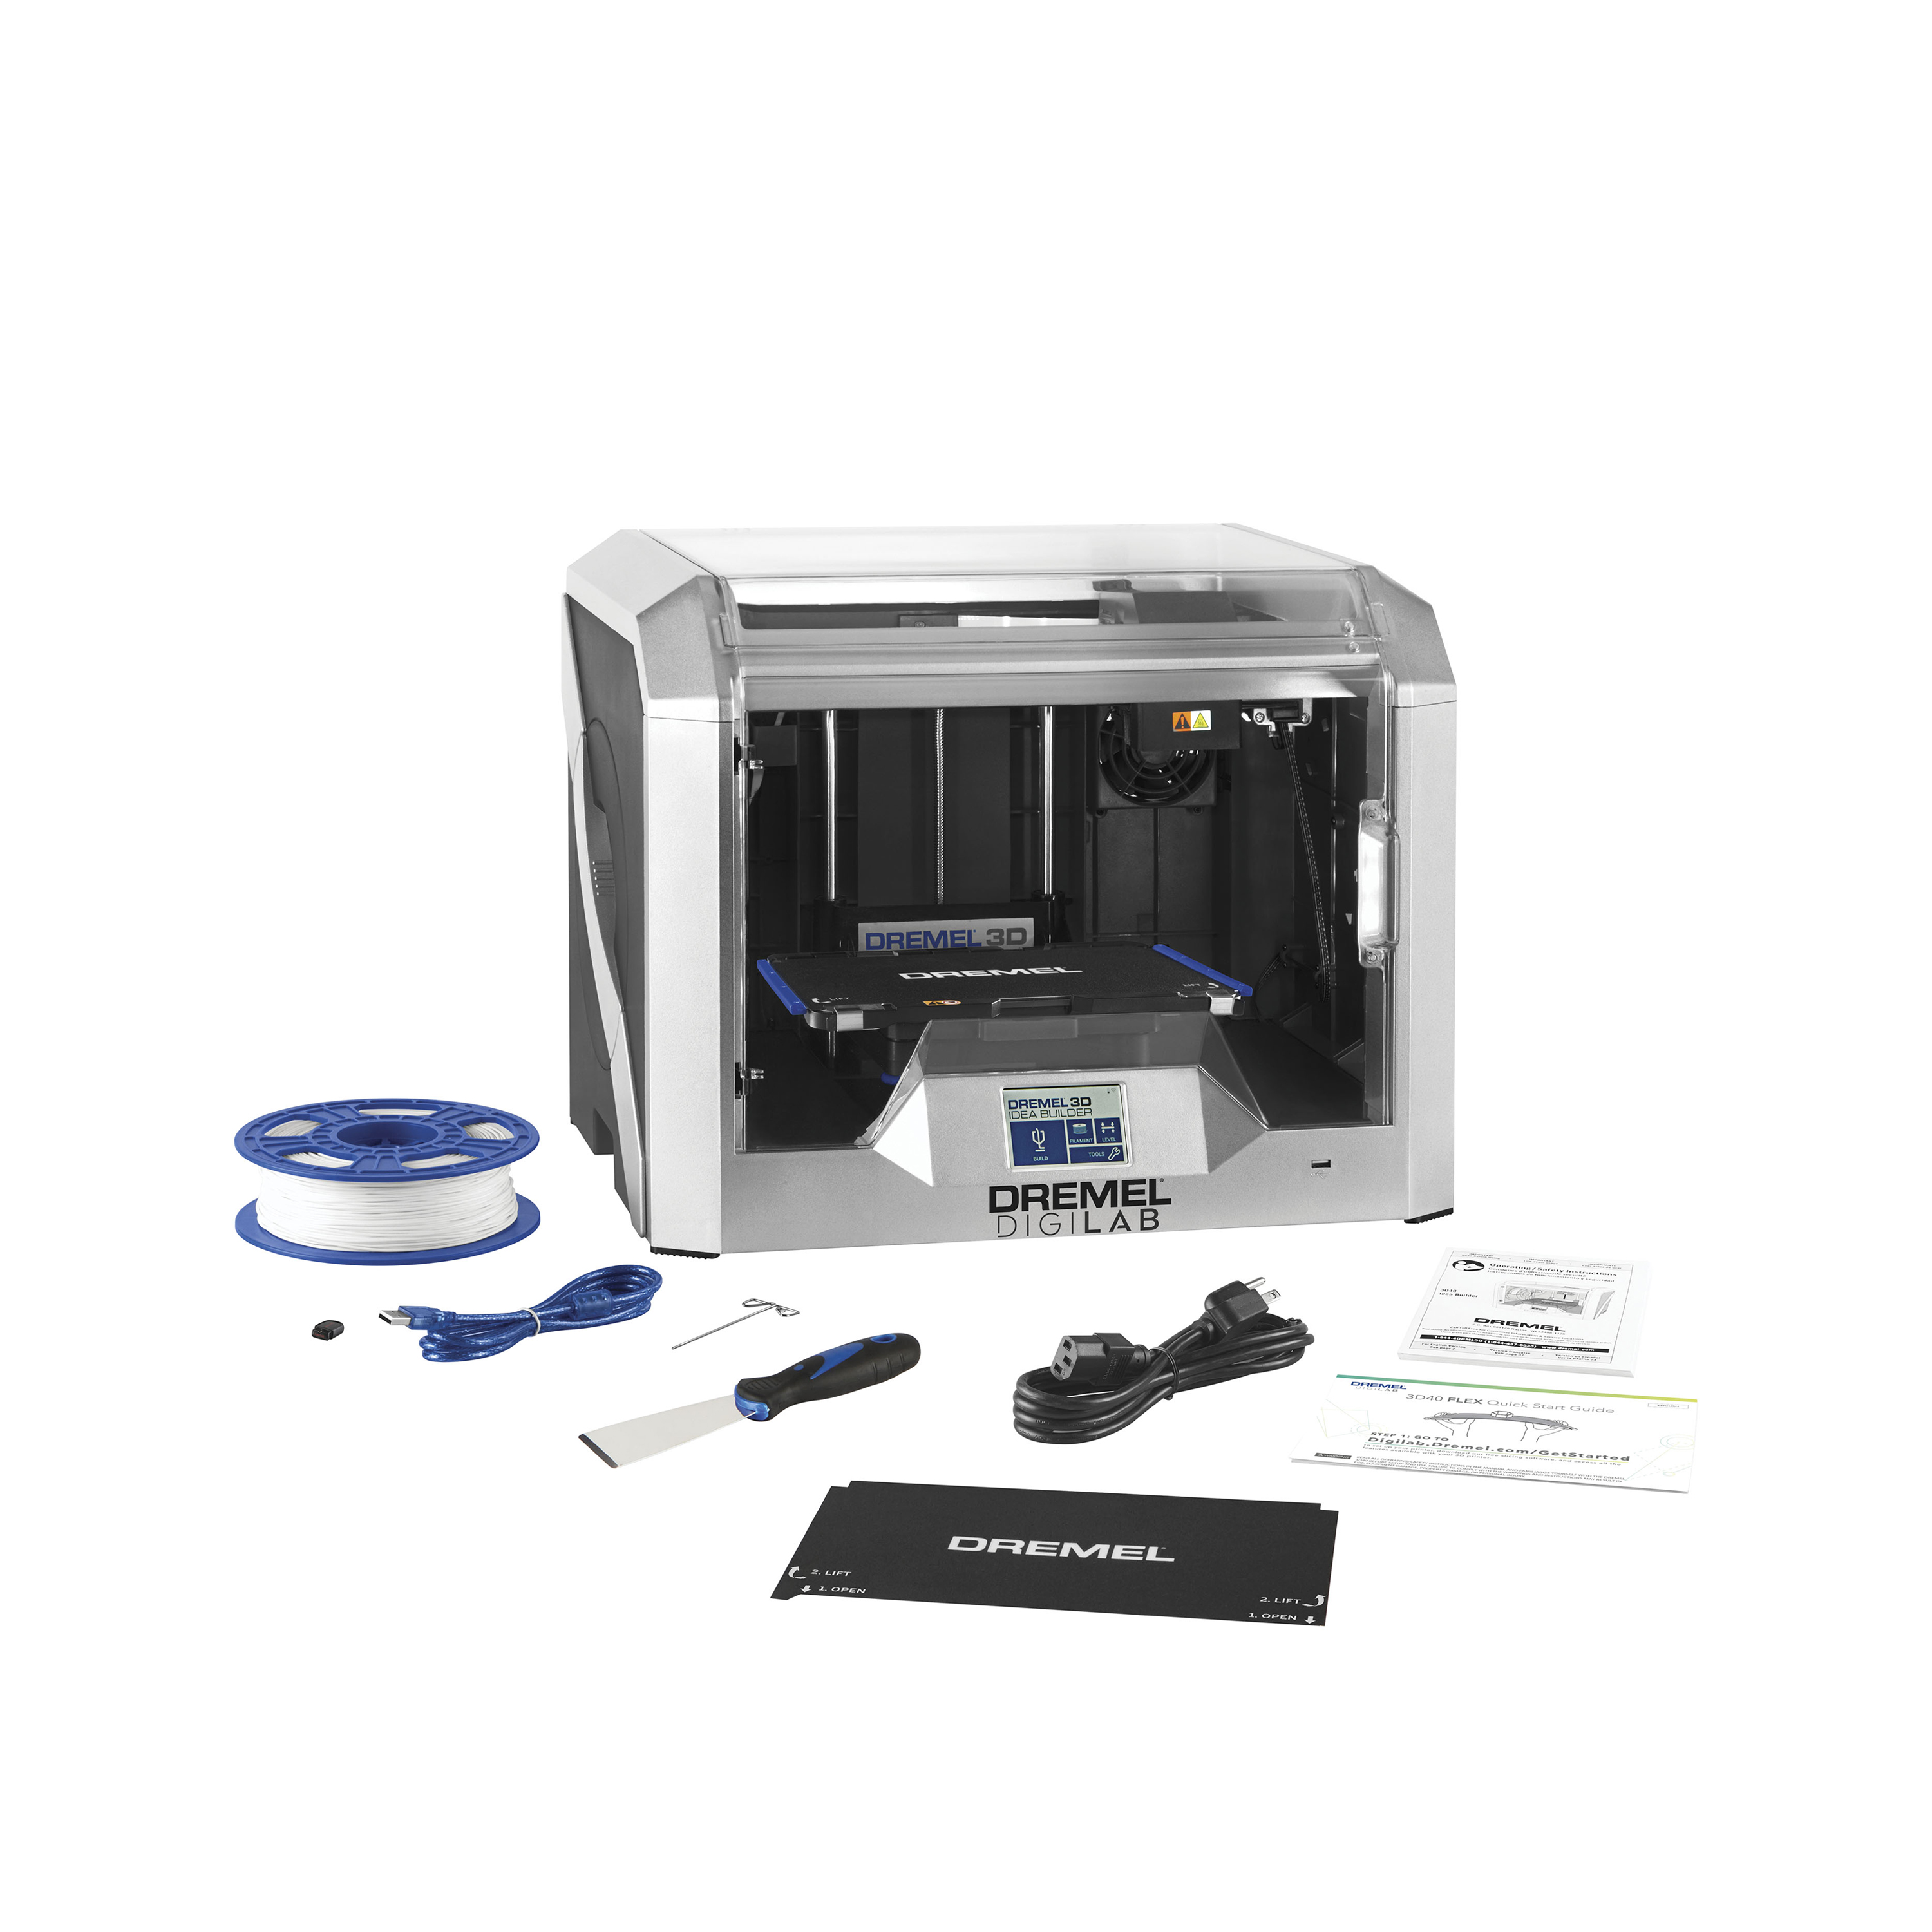 Image of 3D40-FLX-01 3D printer kit with all included contents